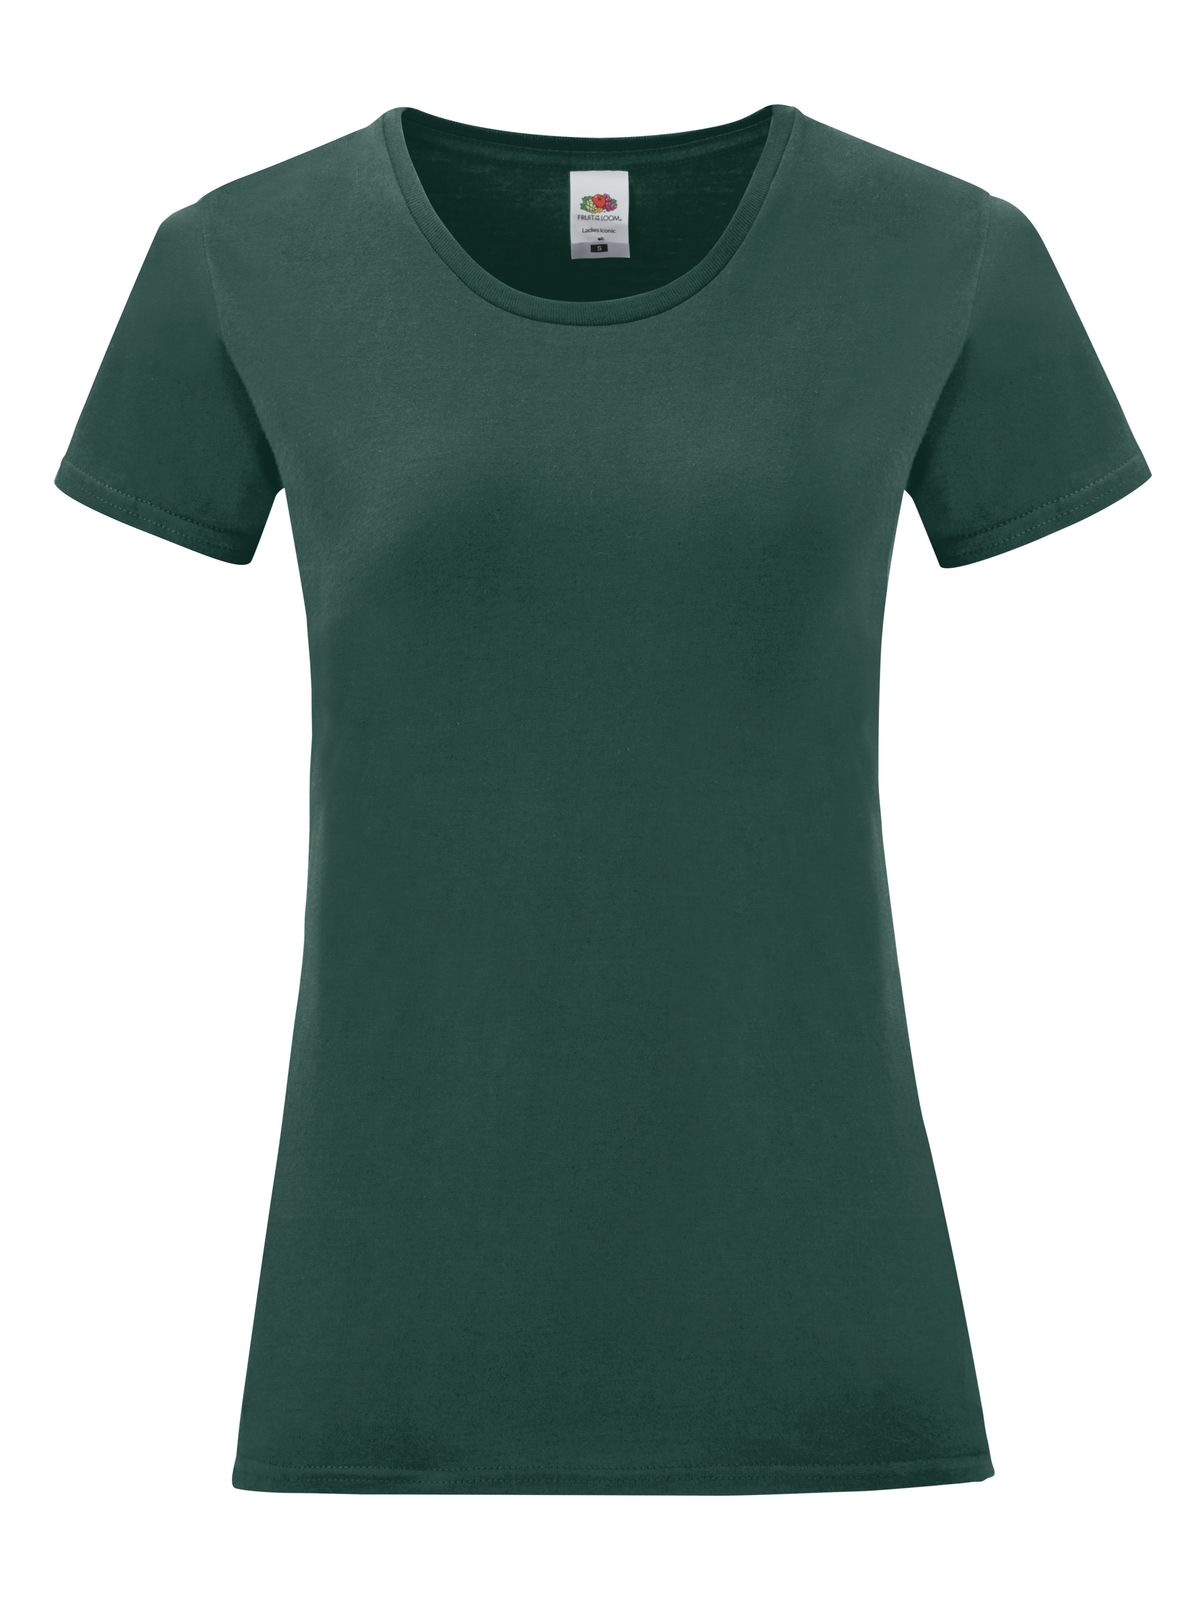 ladies-iconic-150-t-forest-green.webp